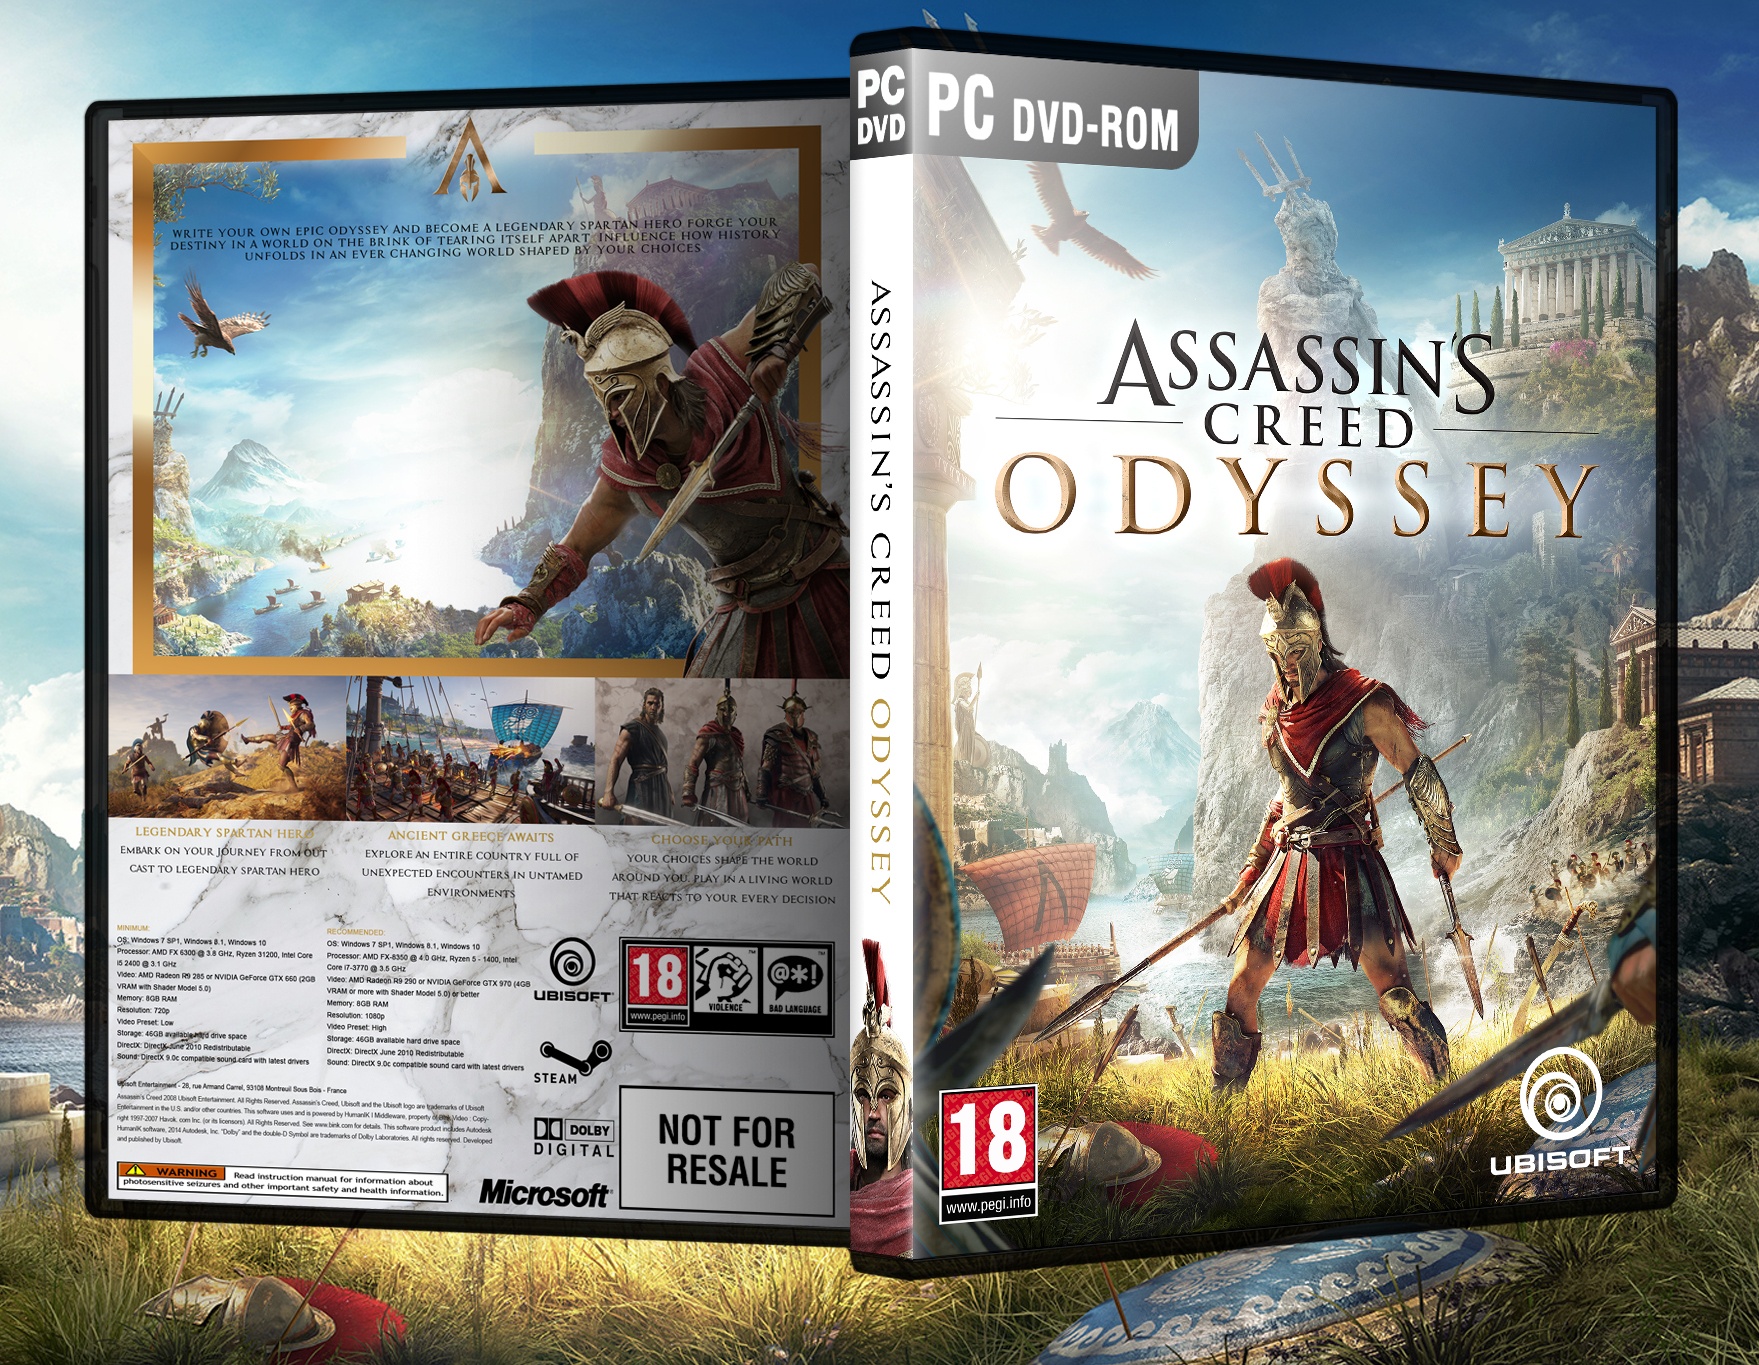 Assassin's Creed Odyssey box cover